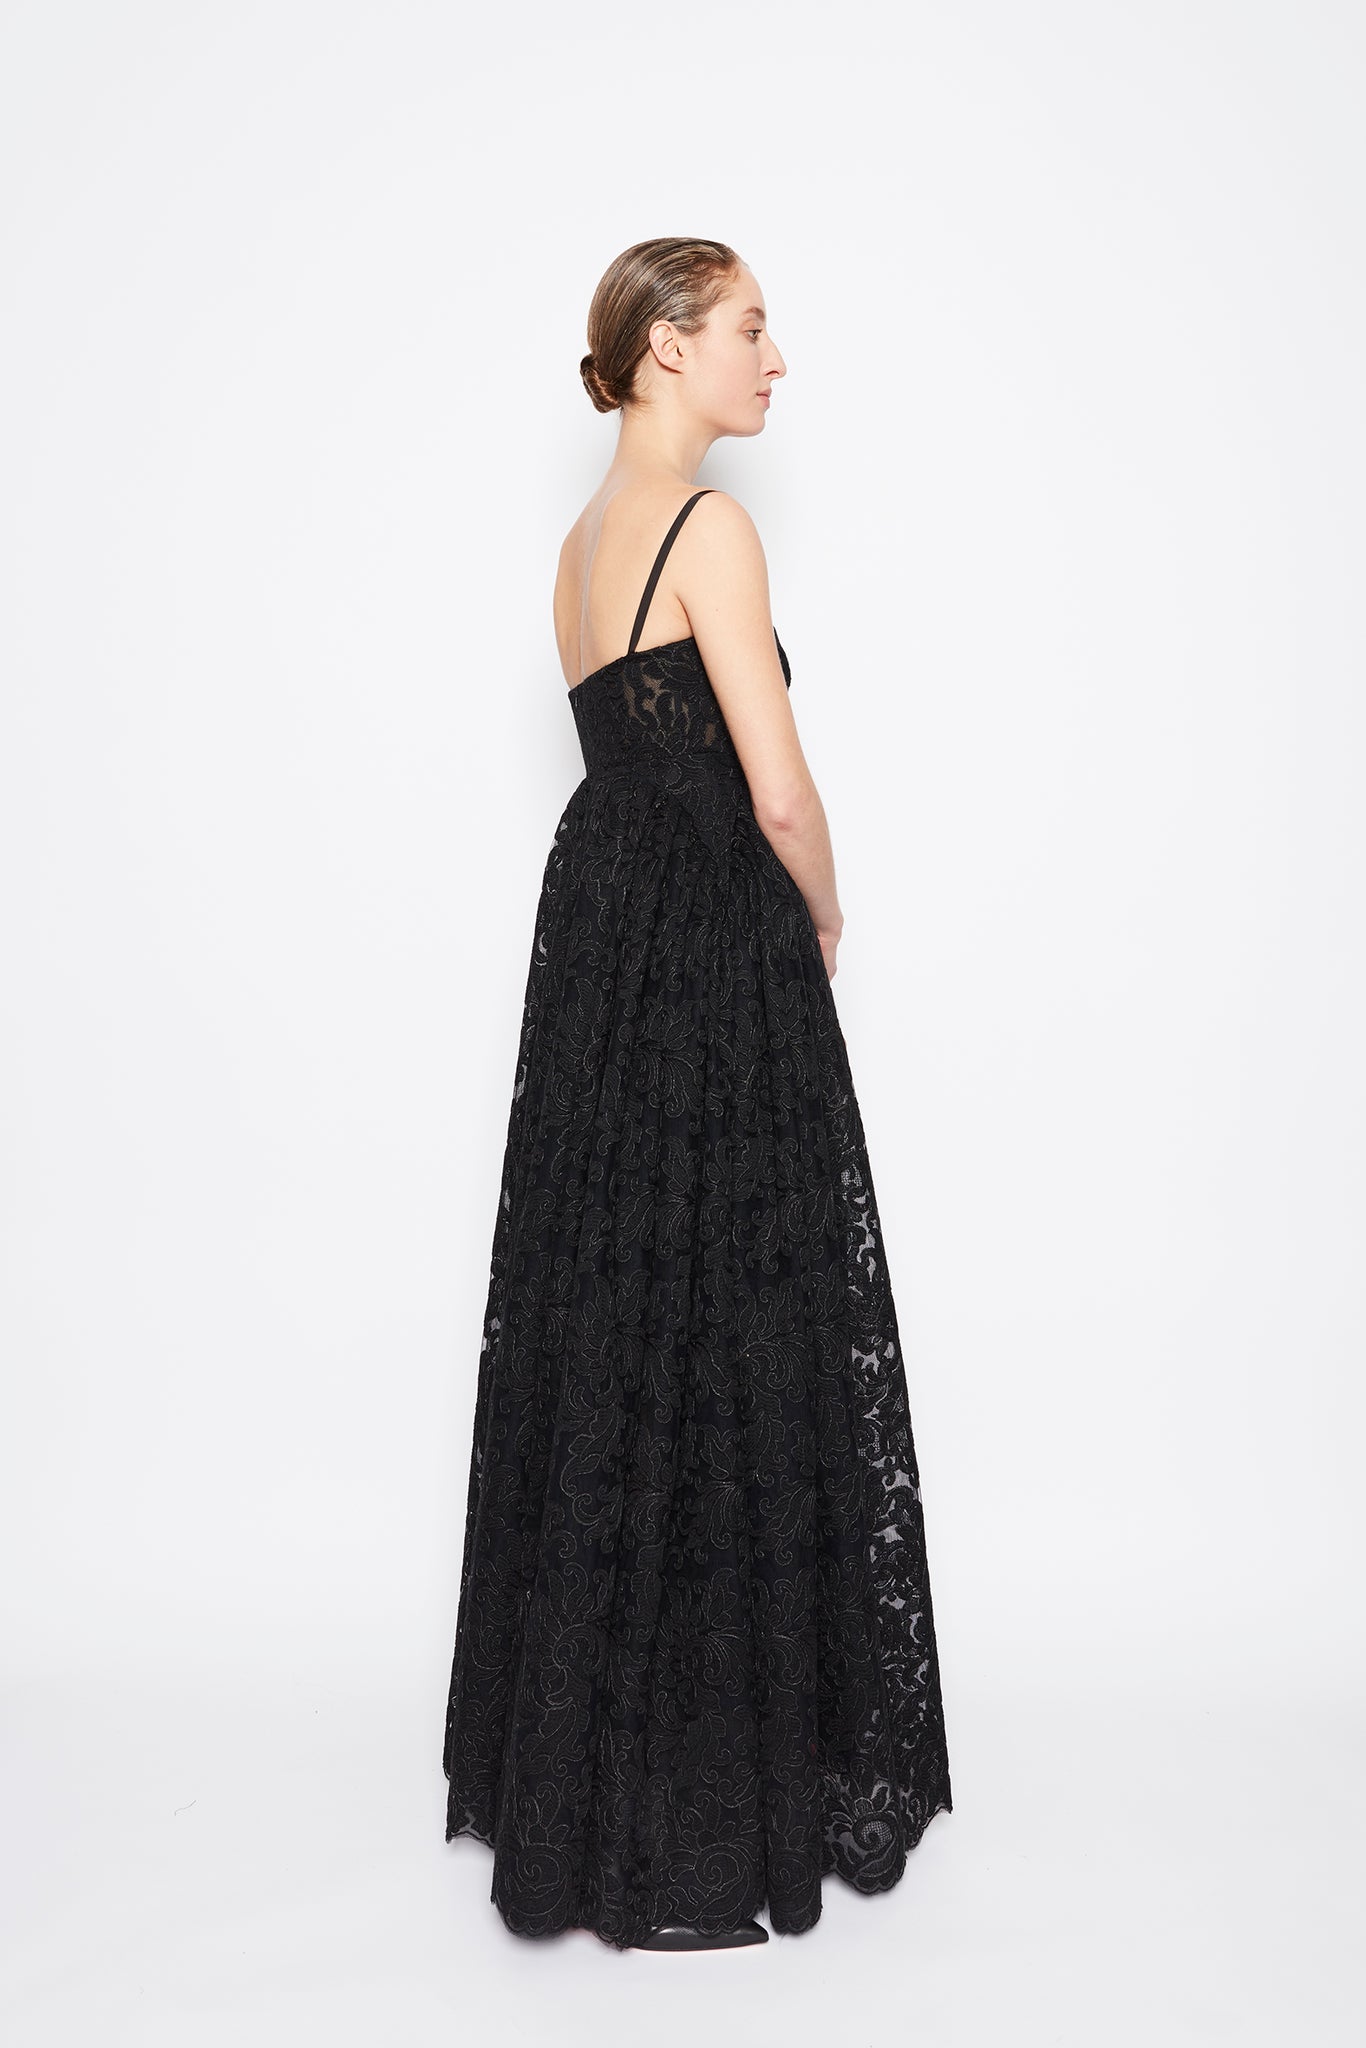 Dimona Embroidered Lace Dress Black